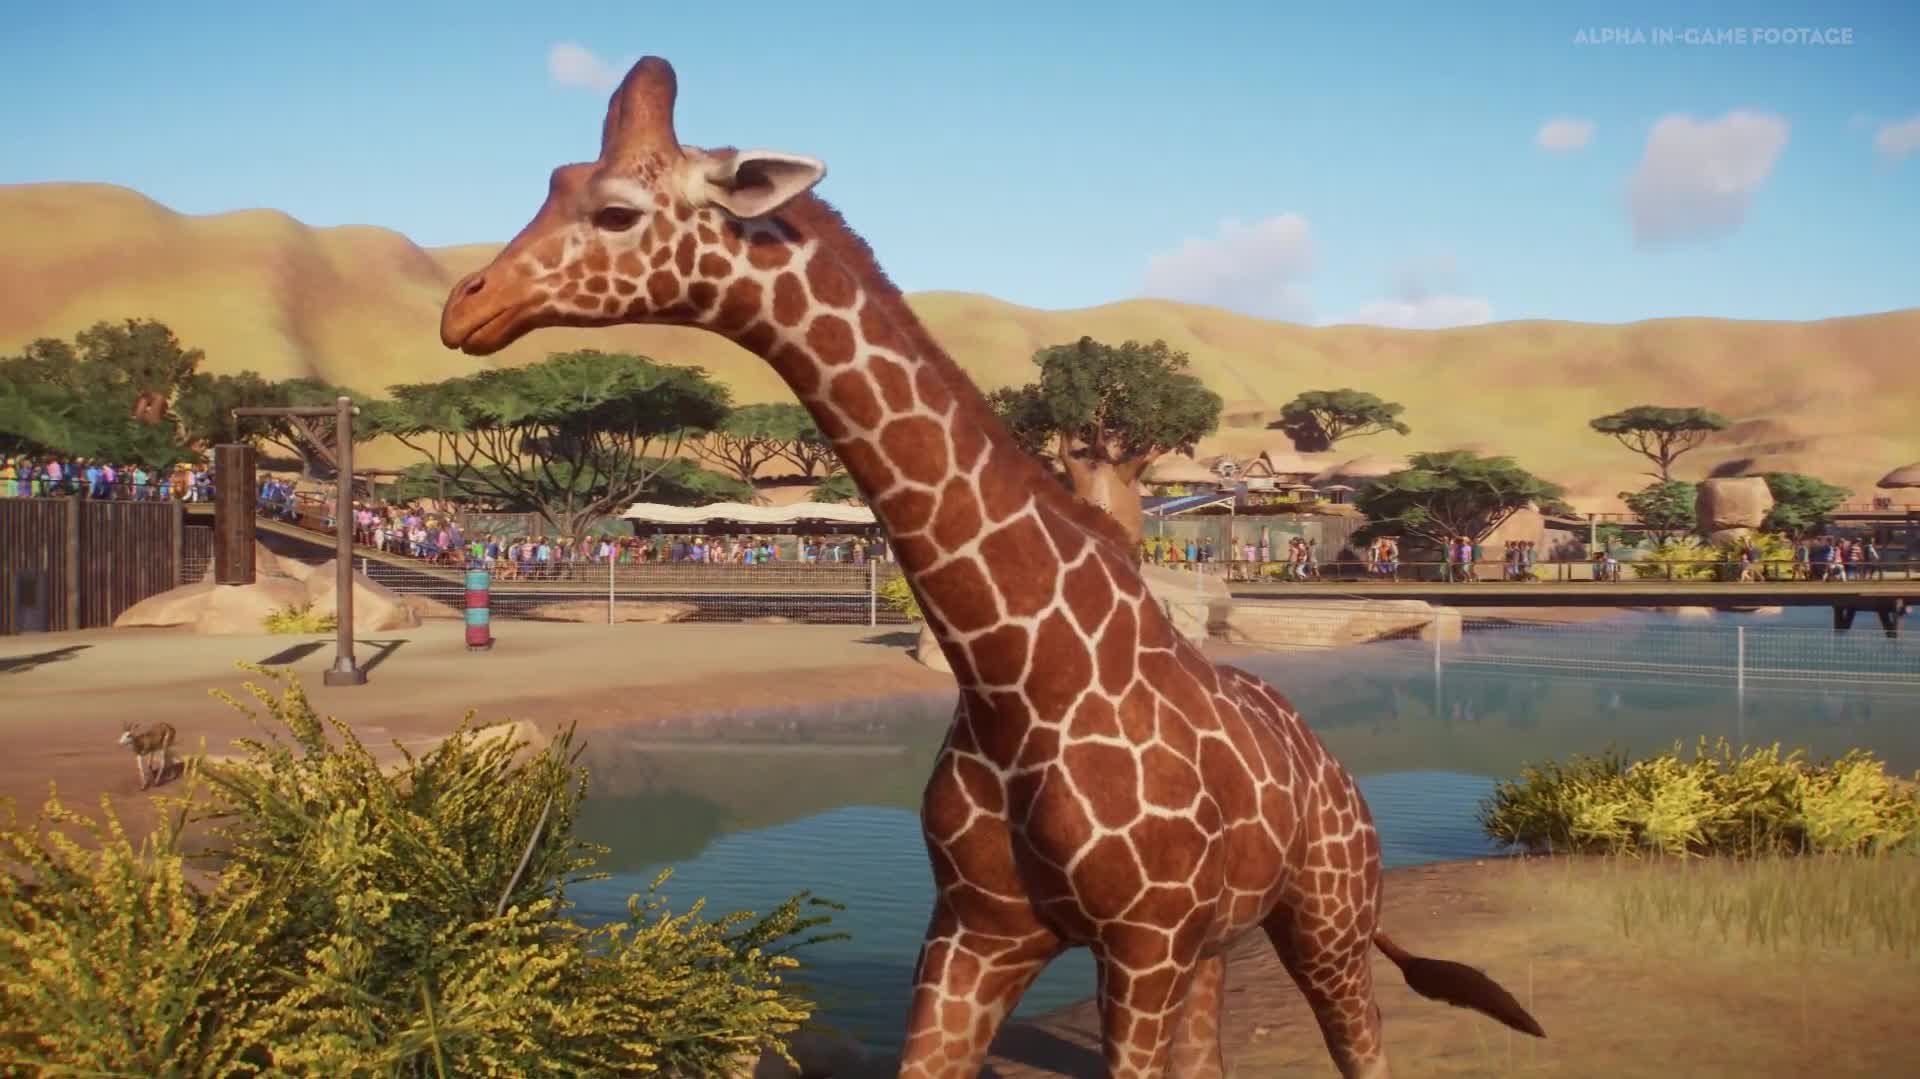 planet zoo xbox one download free